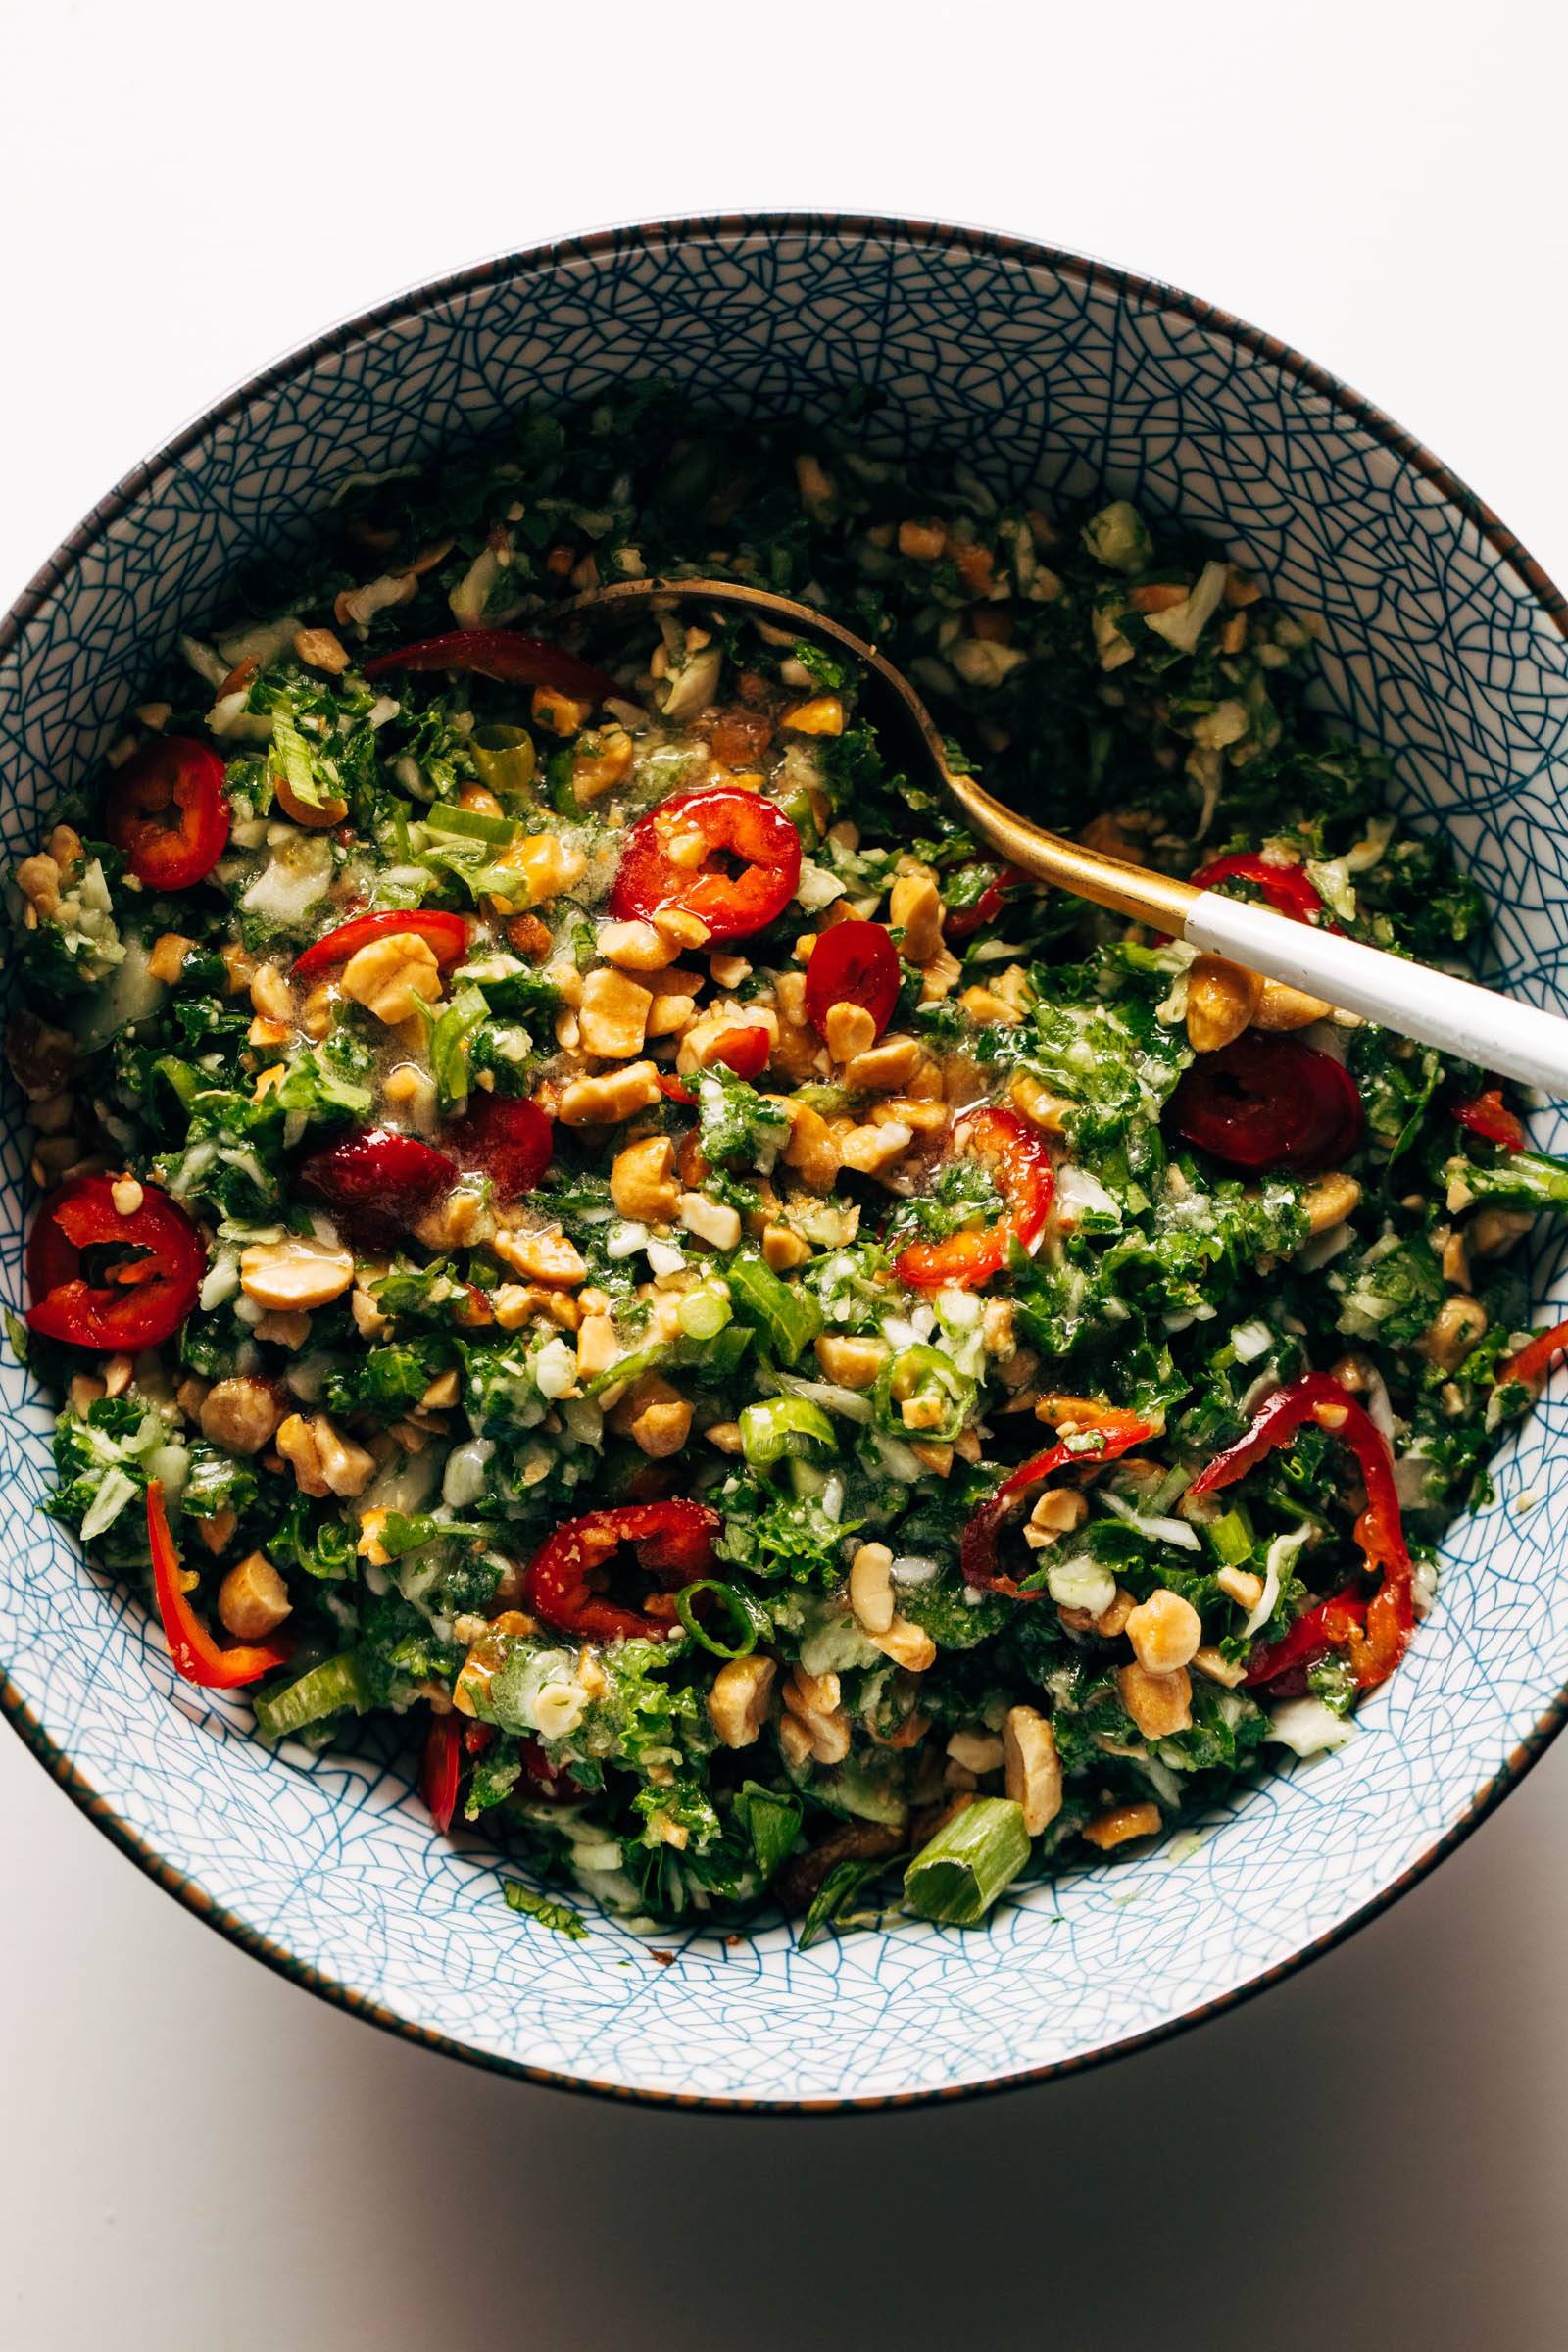 Peanut kale salad in a bowl with a spoon